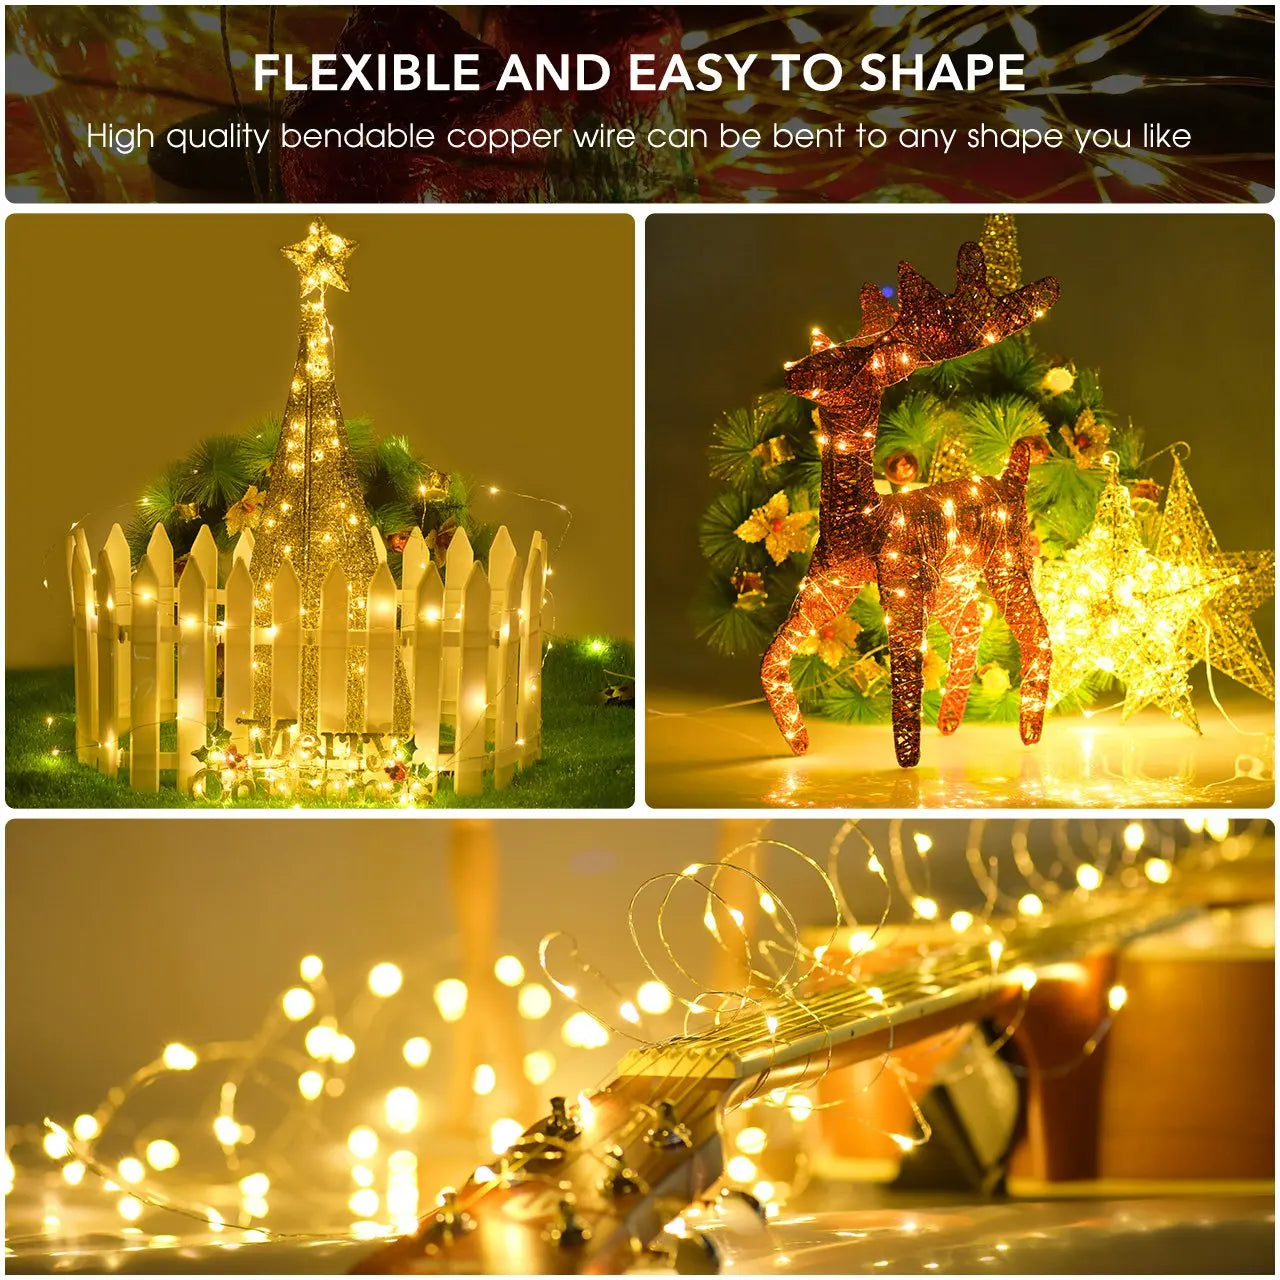 LED Solar Fairy Light, Moldable copper wire allows flexible shaping to create custom designs.